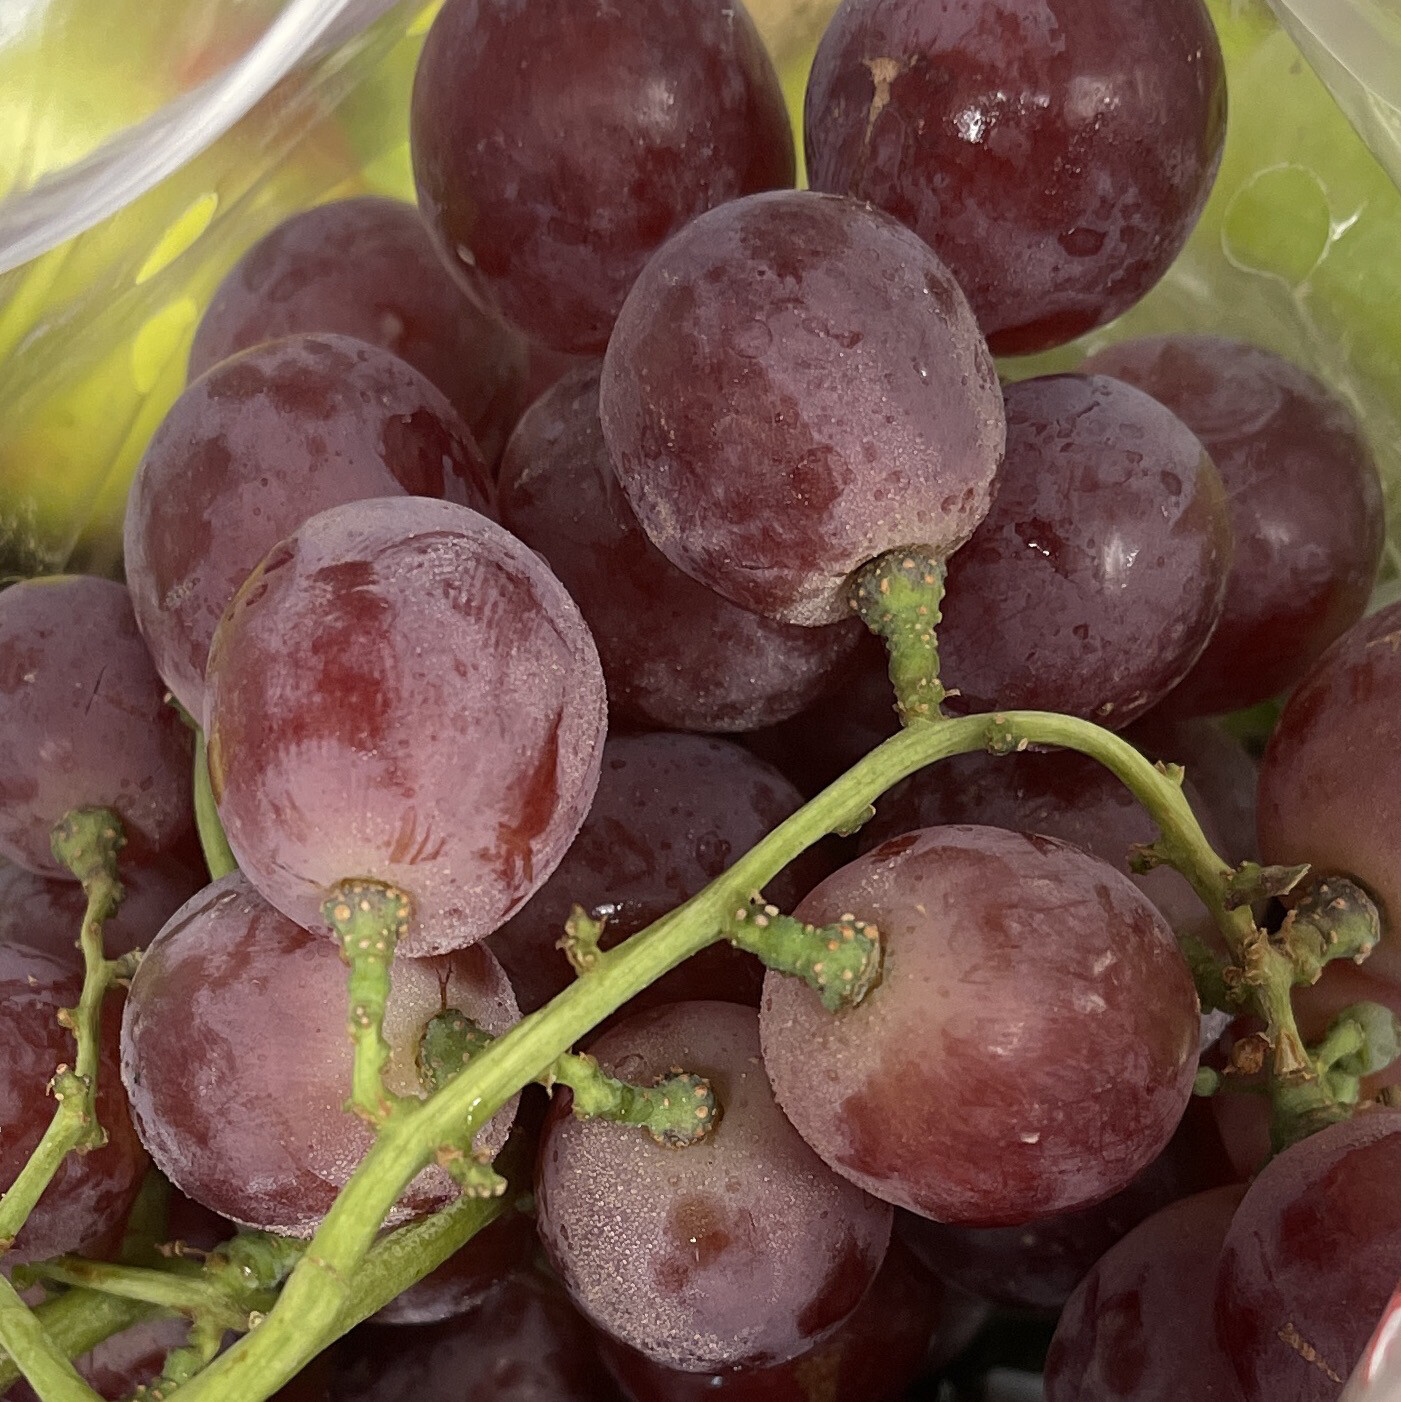 Red Seeded Grapes